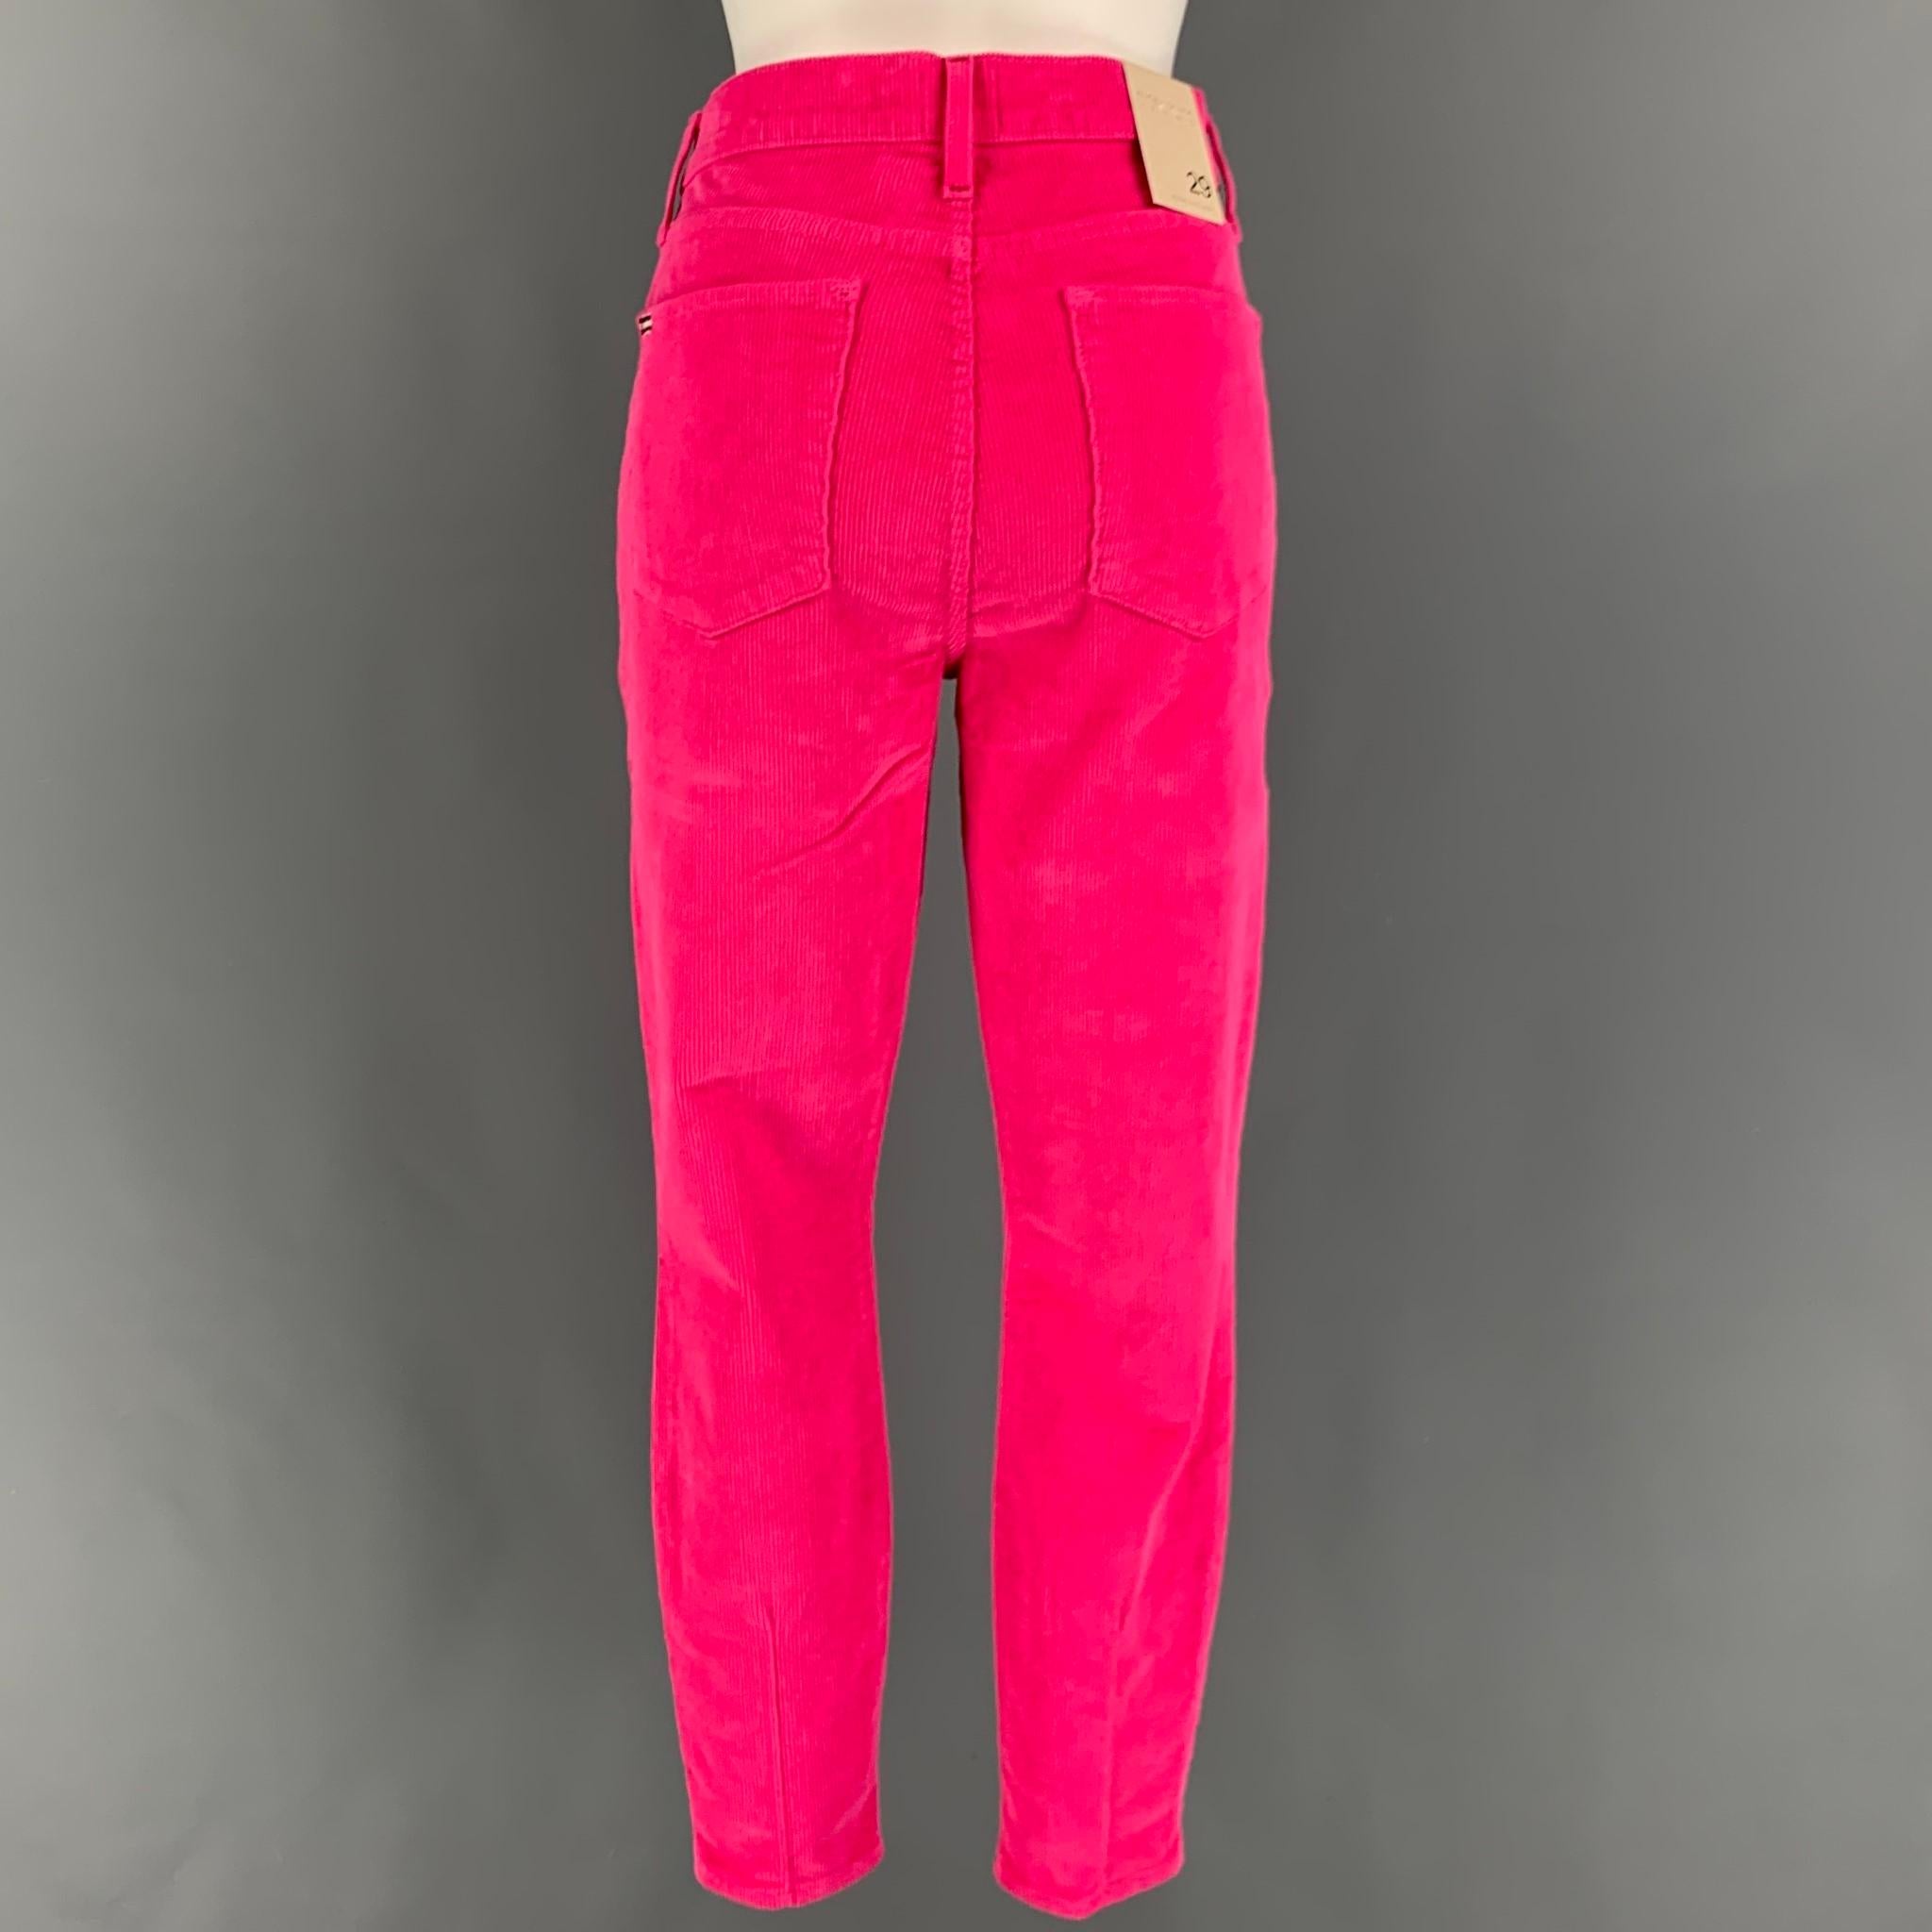 ALICE + OLIVIA casual pants comes in a pink cotton corduroy featuring a jean cut, skinny fit, and a zip fly closure. Made in USA.

New With Tags. 
Marked: 29
Original Retail Price: $225.00

Measurements:

Waist: 29 in.
Rise: 11 in.
Inseam: 27 in. 